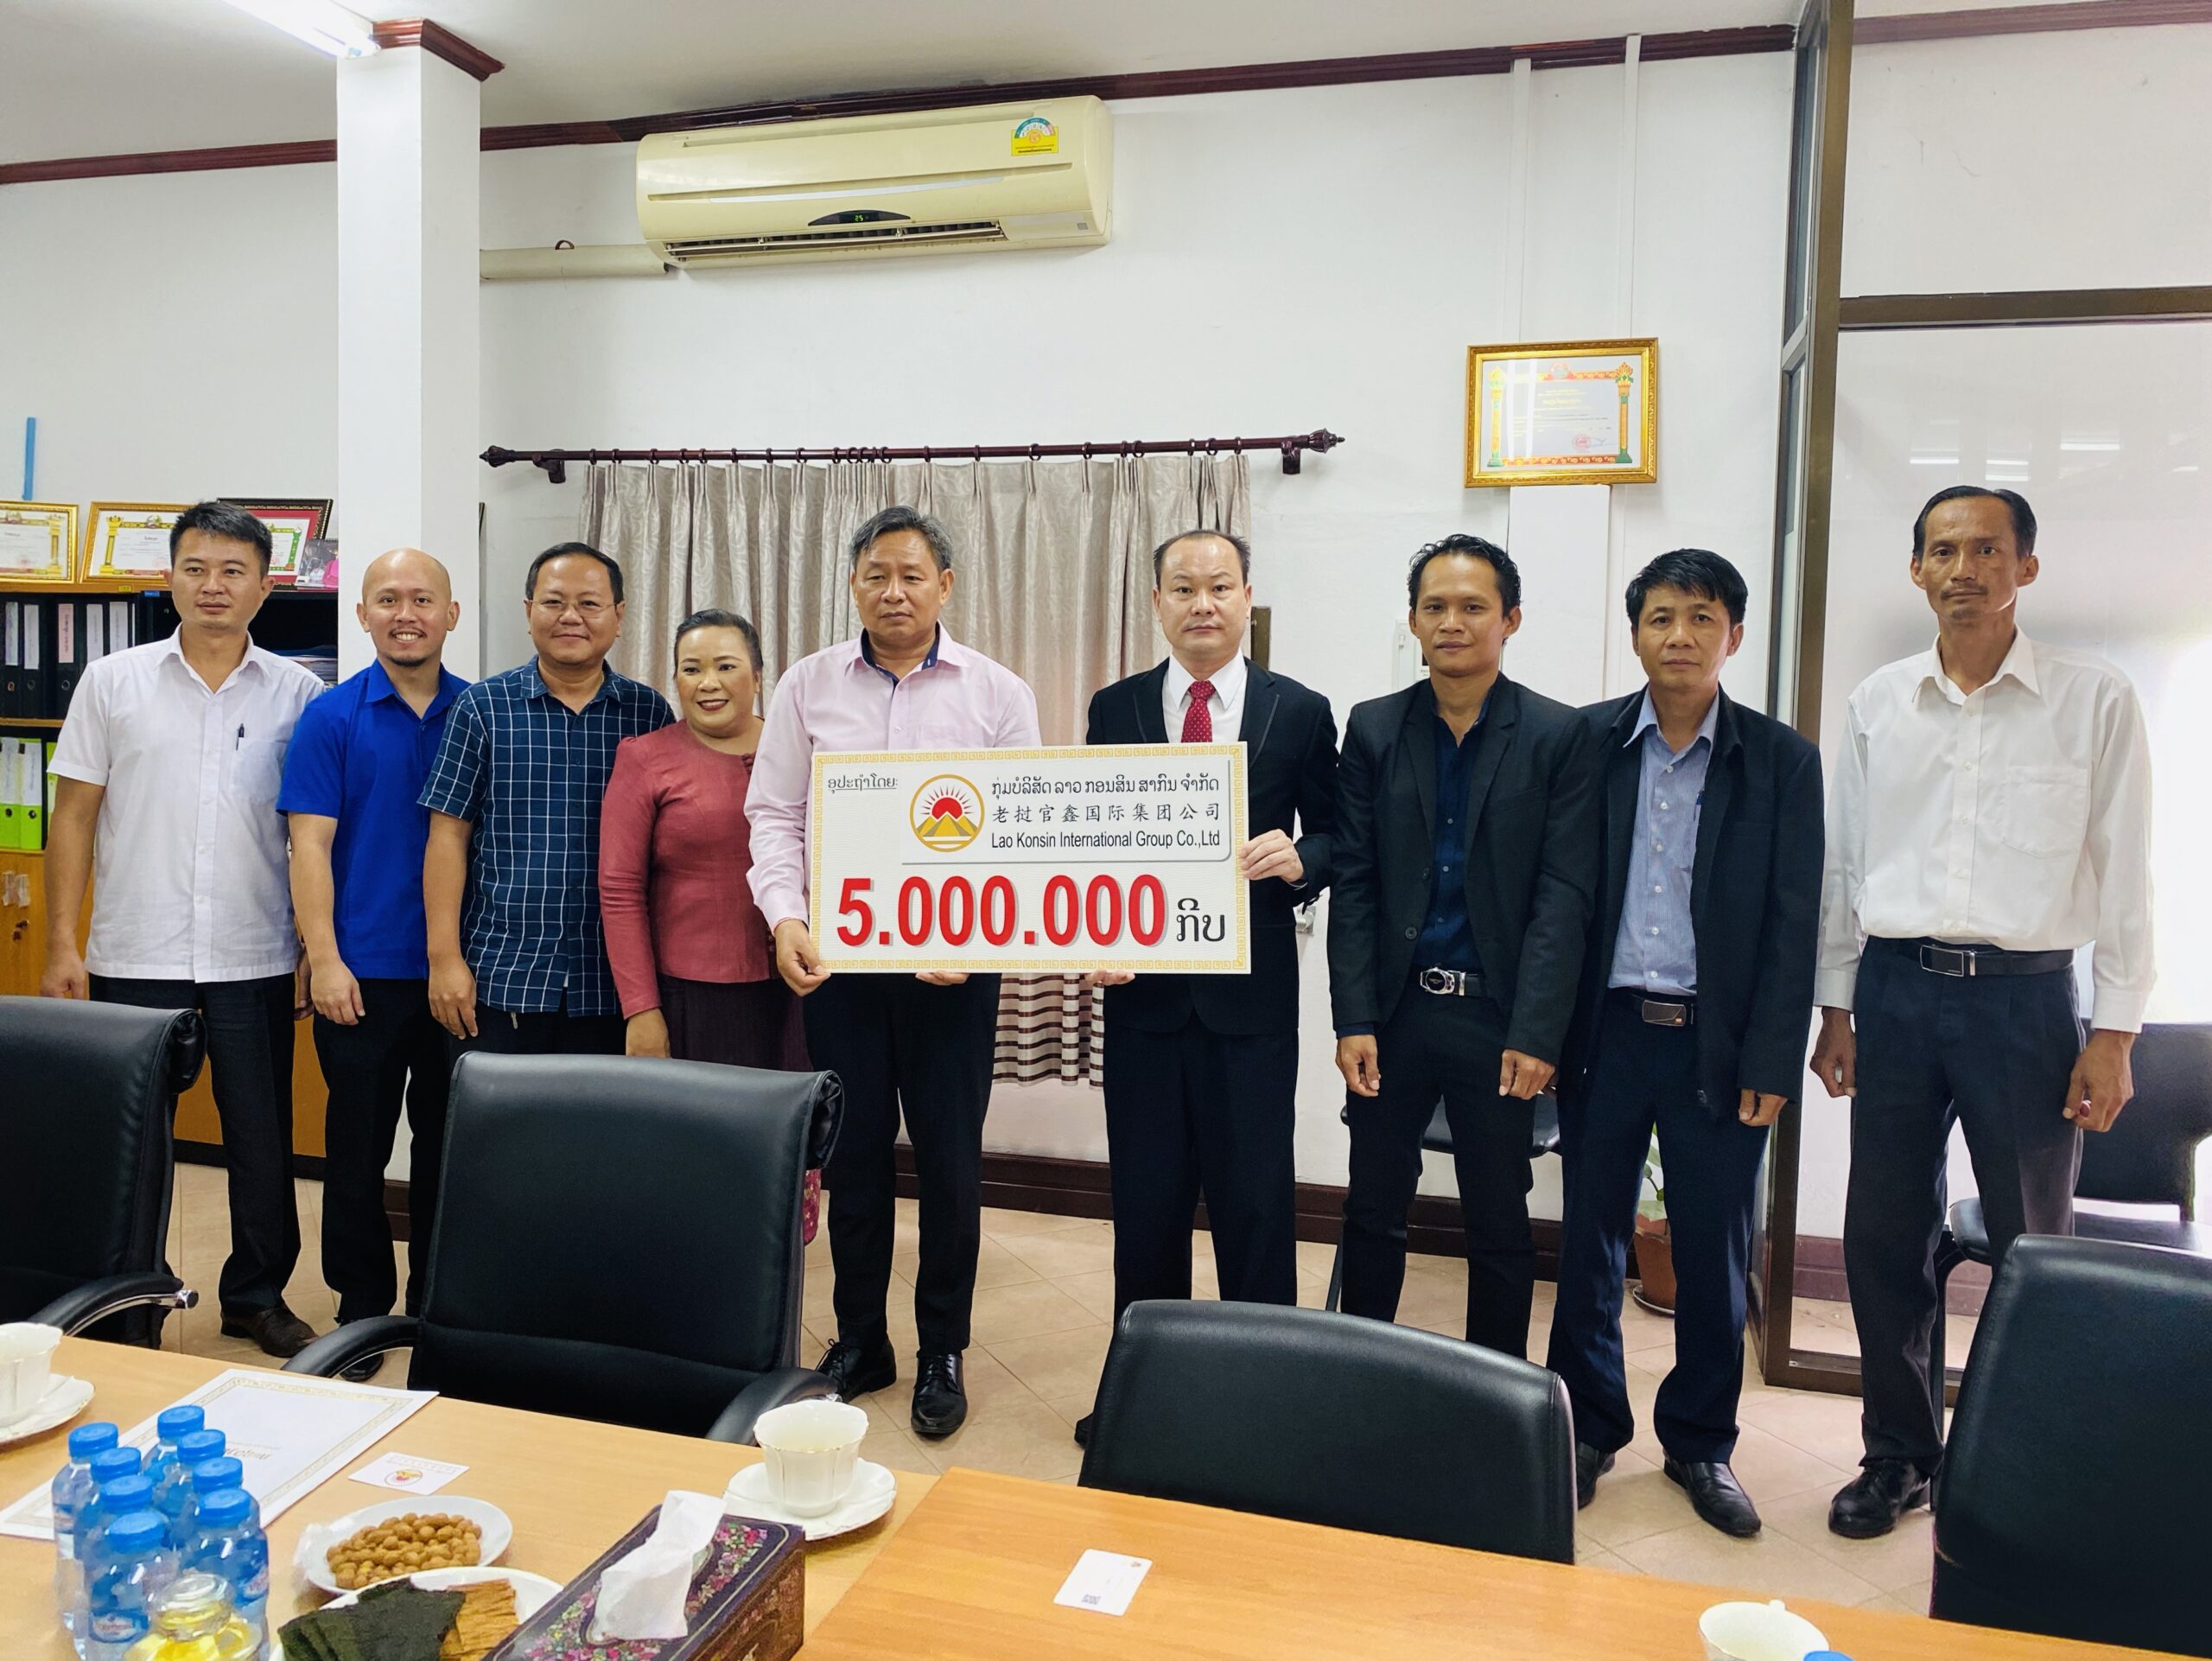 Lao Konsin International Group donated to the upcoming Party Congress of the Civil Service Evaluation and Development Department of the Ministry of the Interior